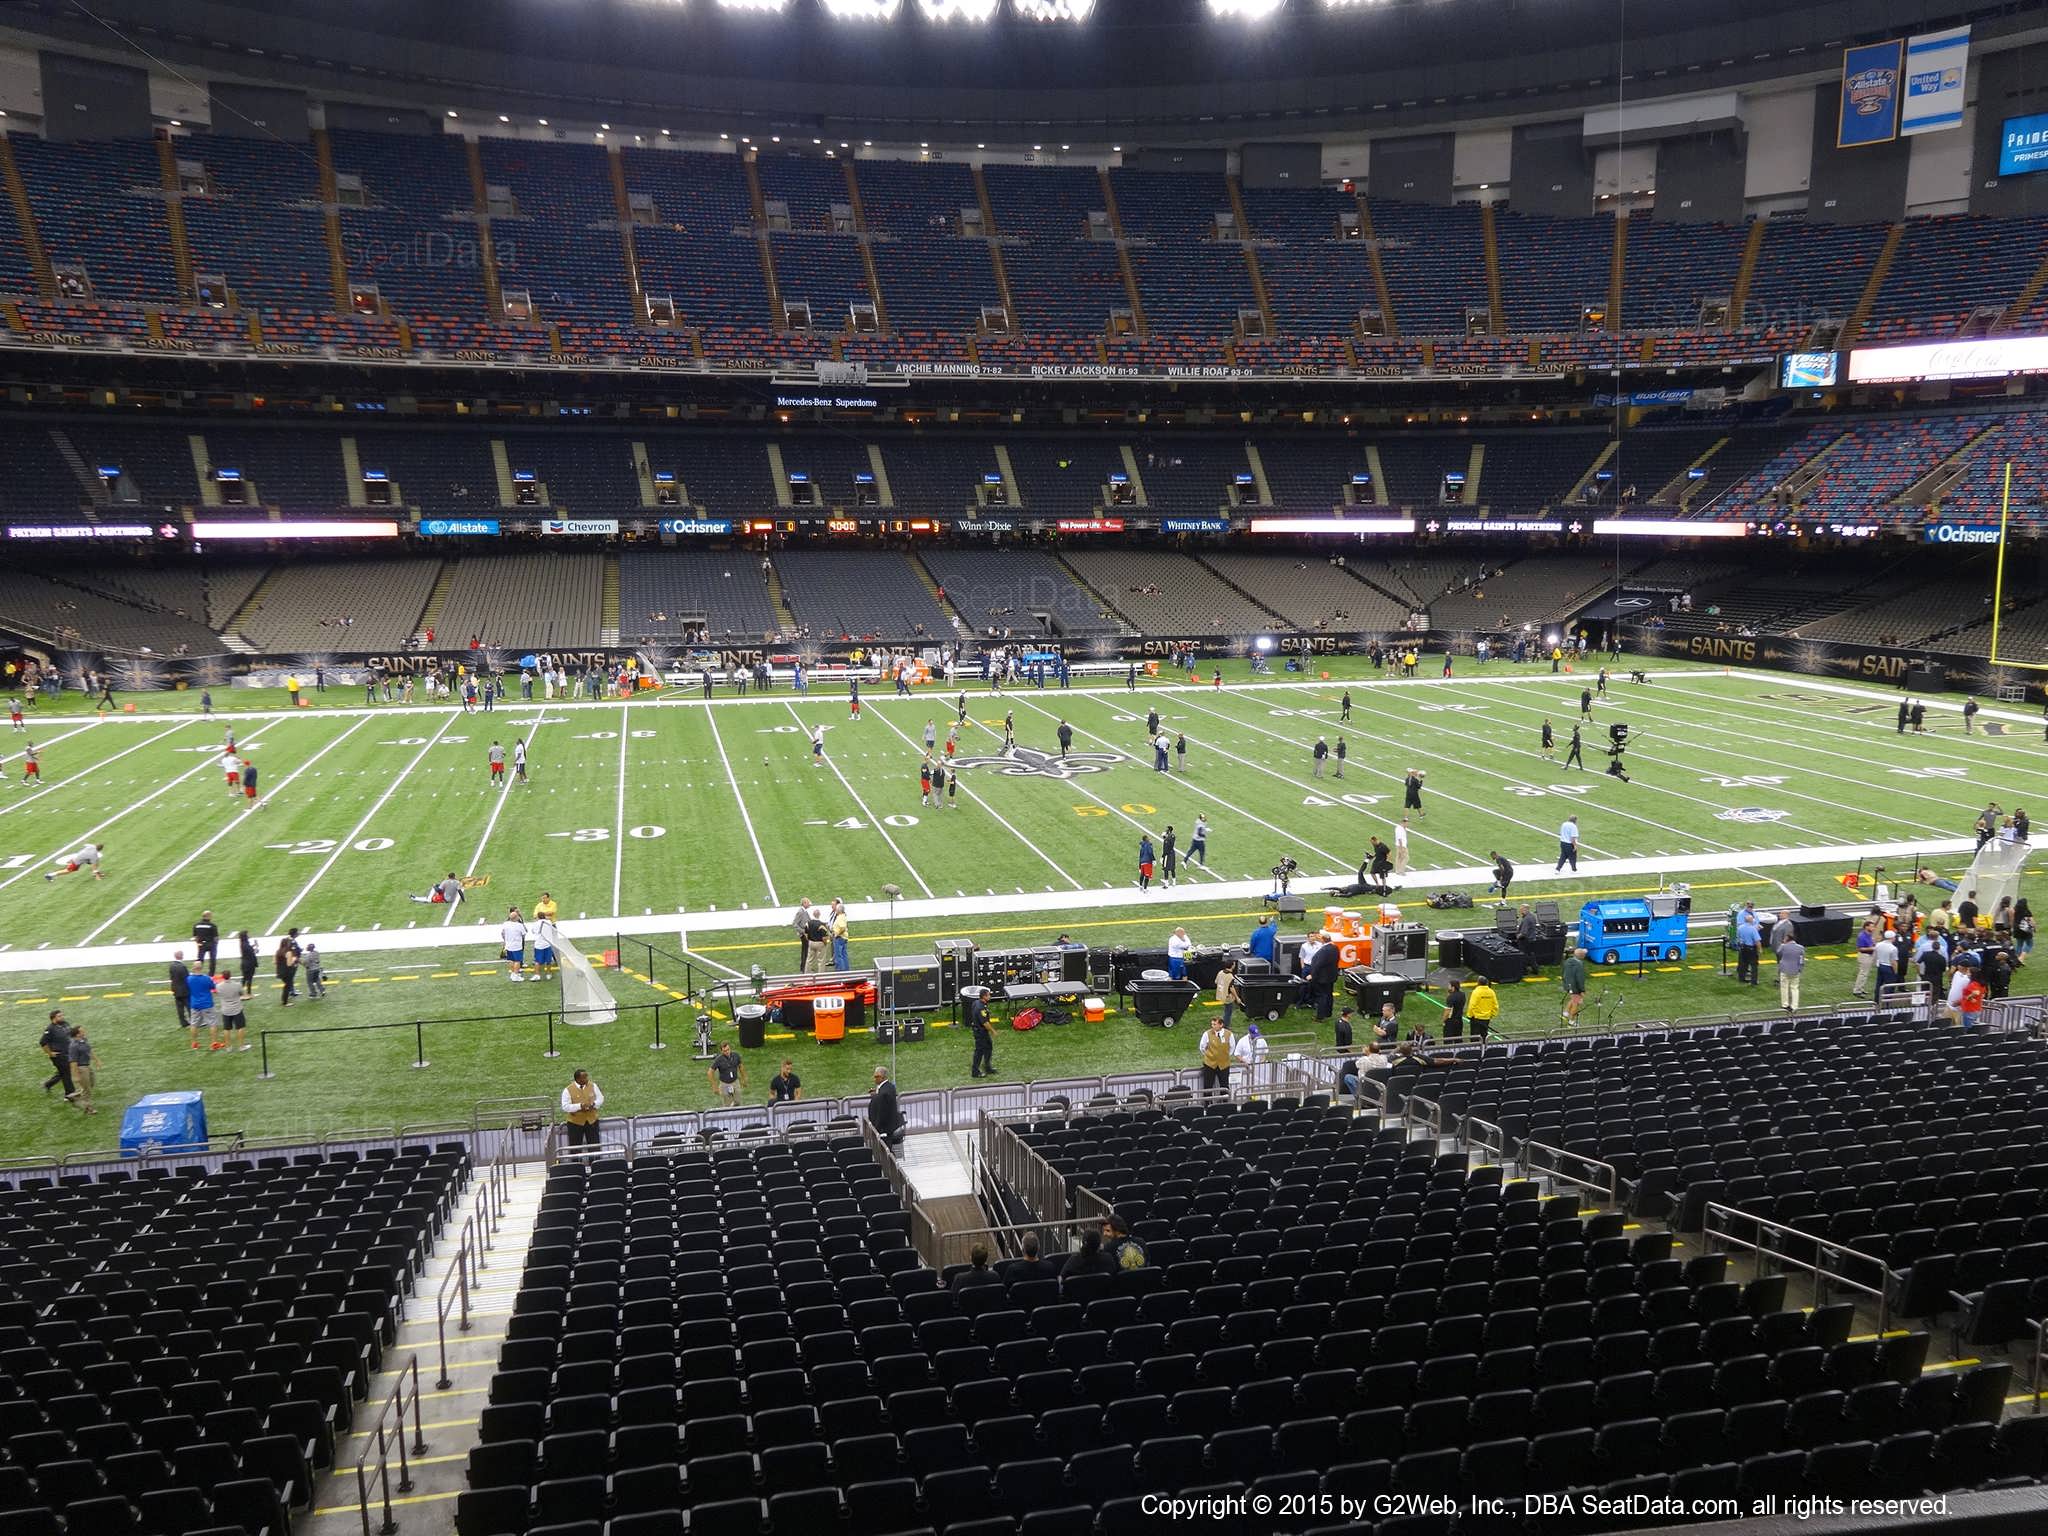 Seat view from section 267 at the Mercedes-Benz Superdome, home of the New Orleans Saints